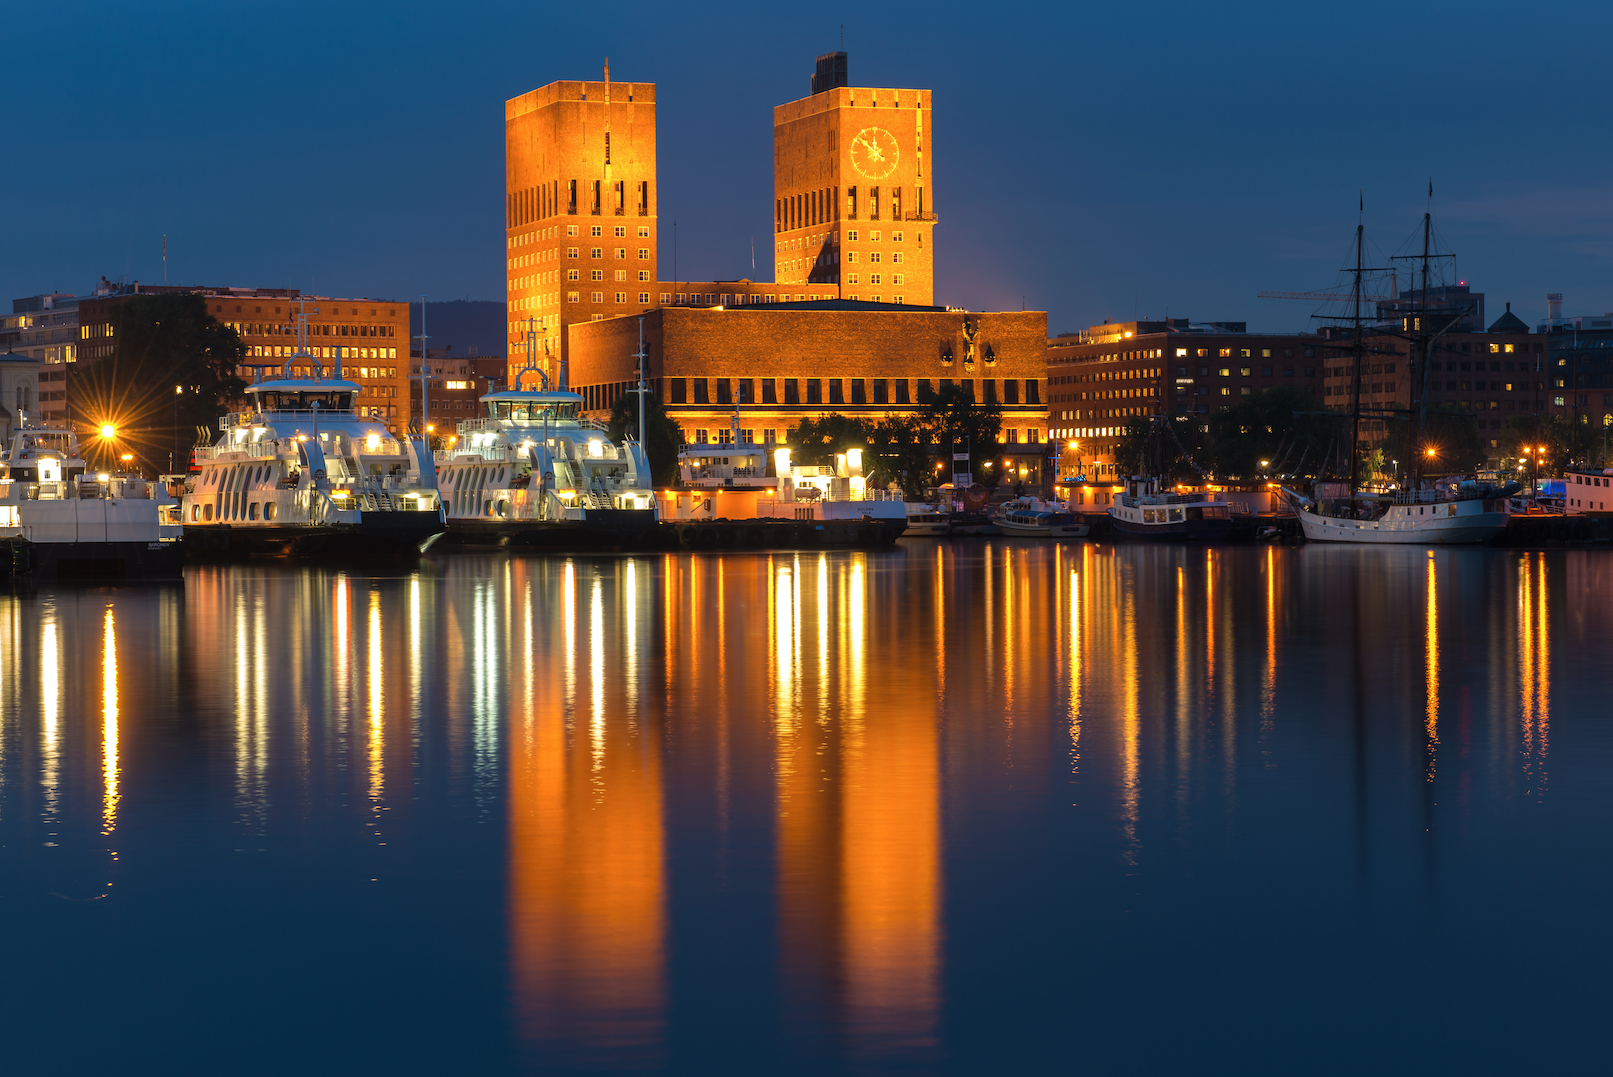 View of Oslo City Hall at nighttime.